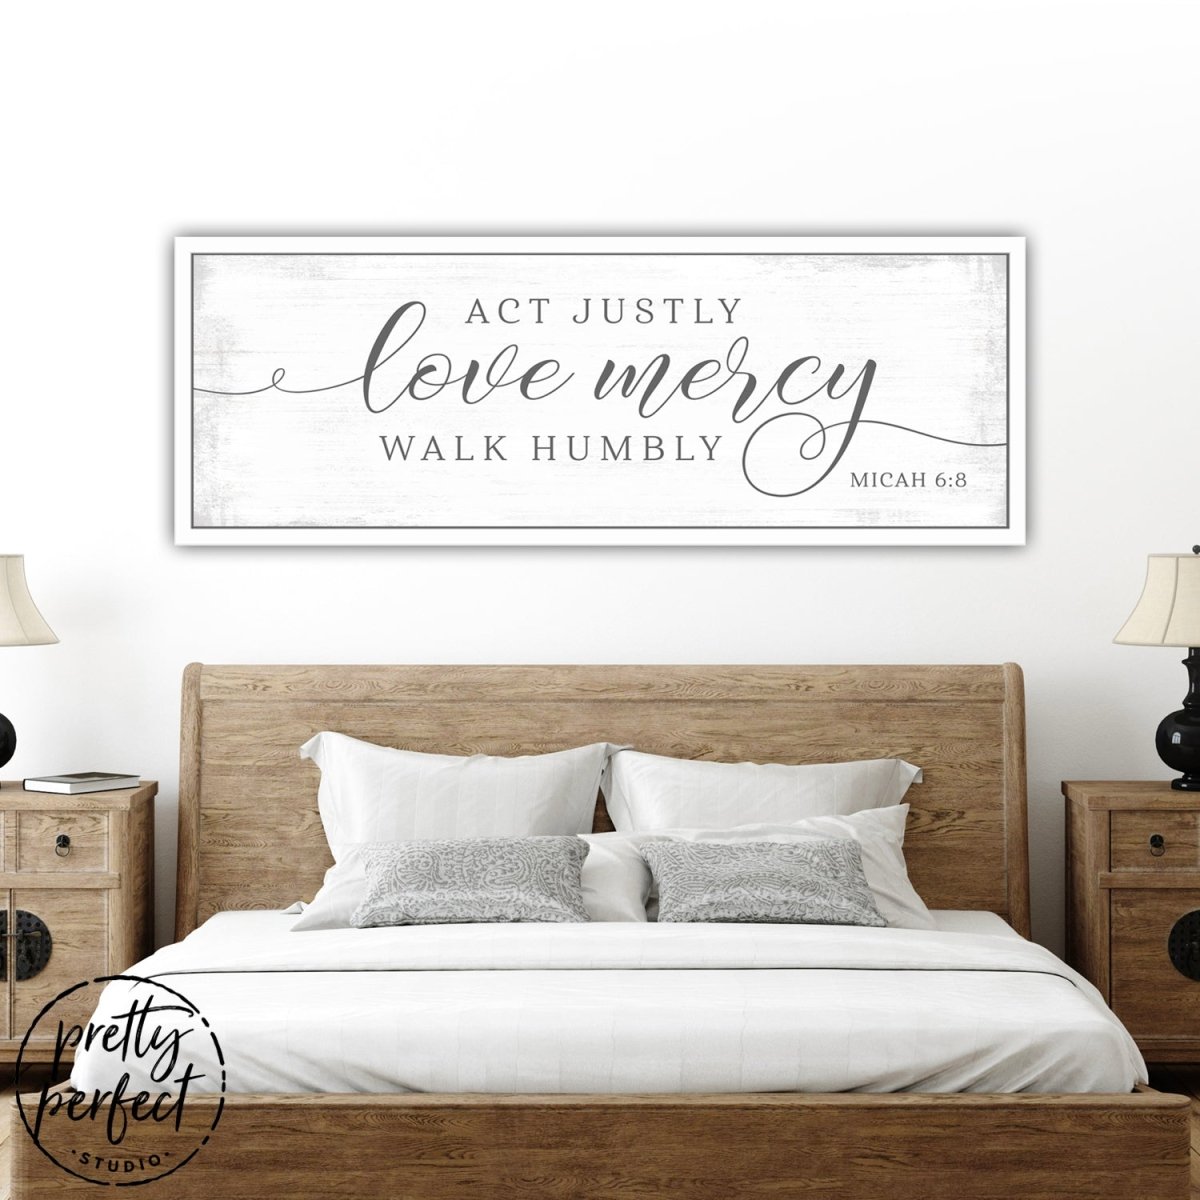 Act Justly Love Mercy Walk Humbly Canvas Wall Art Above Bed - Pretty Perfect Studio